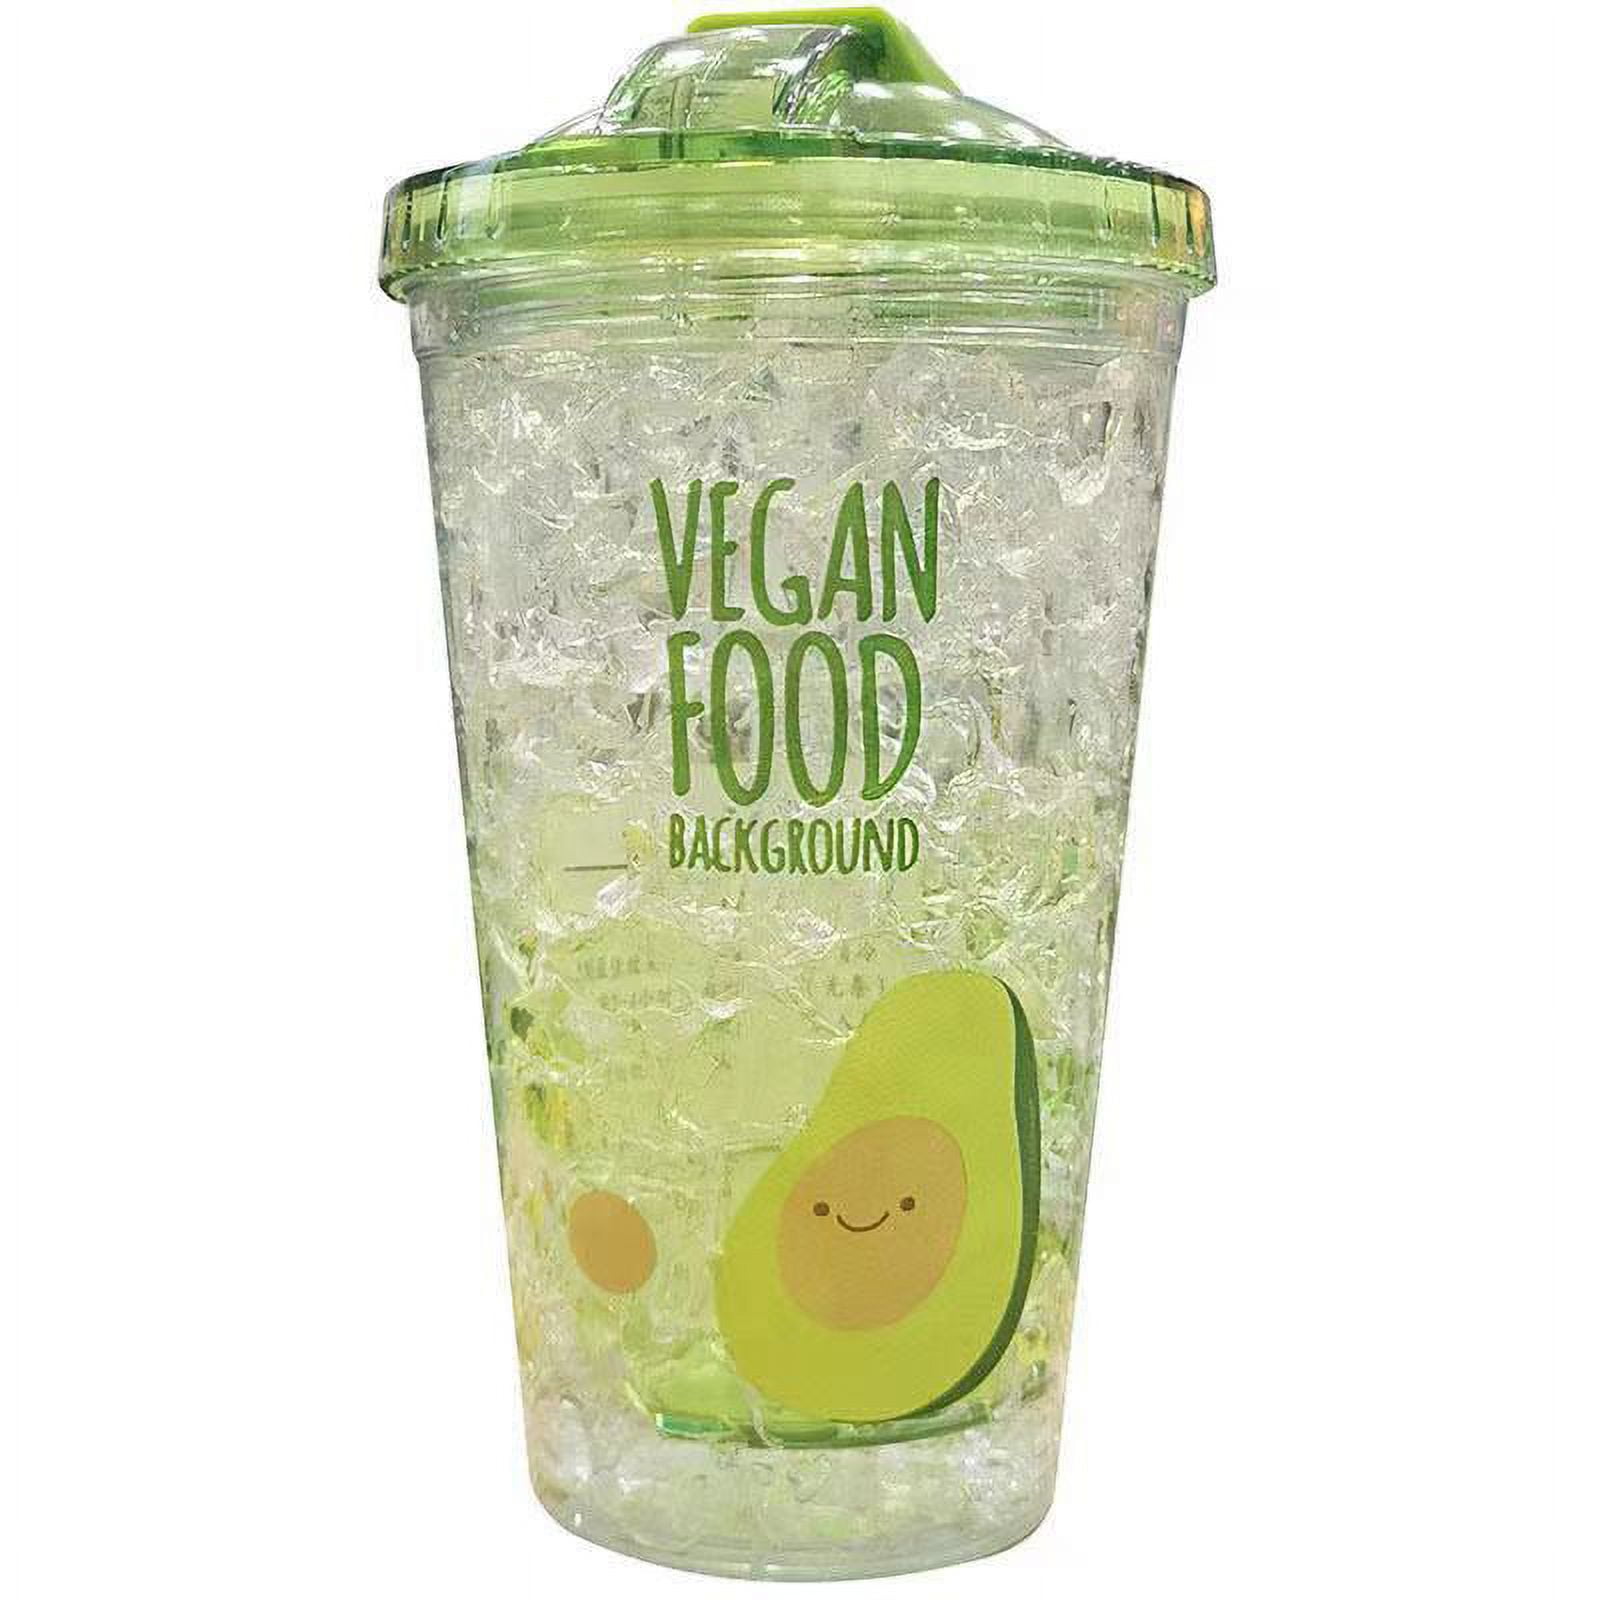 TIMPCV Summer Push Cover Double Layer Avocado Straw Plastic Cups 2 450ML